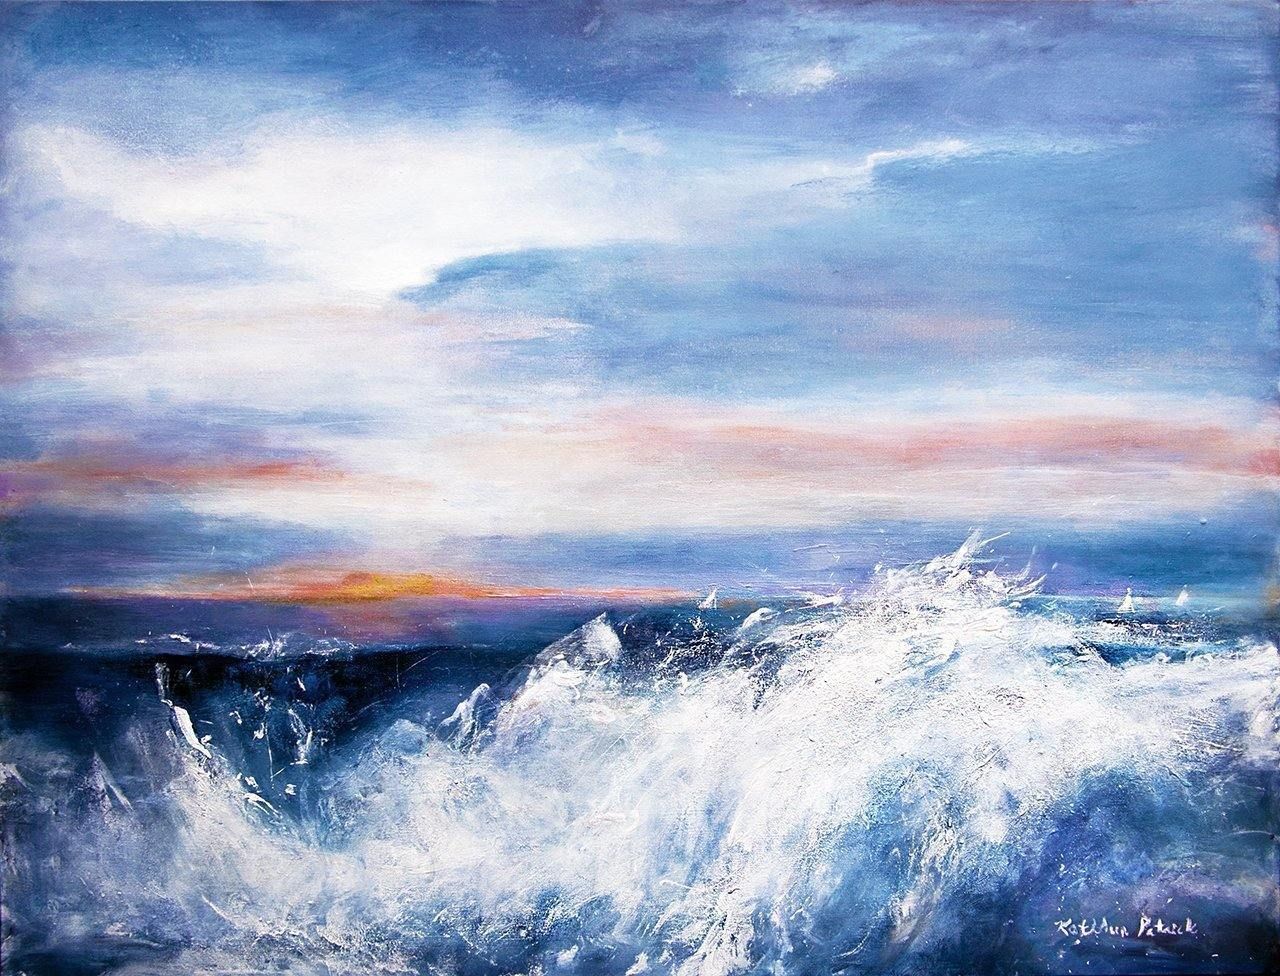 Ocean wave paintings - Original seascape; surf; tropical; sunset; painter; abstract; marine; art; gallery; Chicago art for sale.; contemporary art for sale; Chicago artists; Chicago art gallery